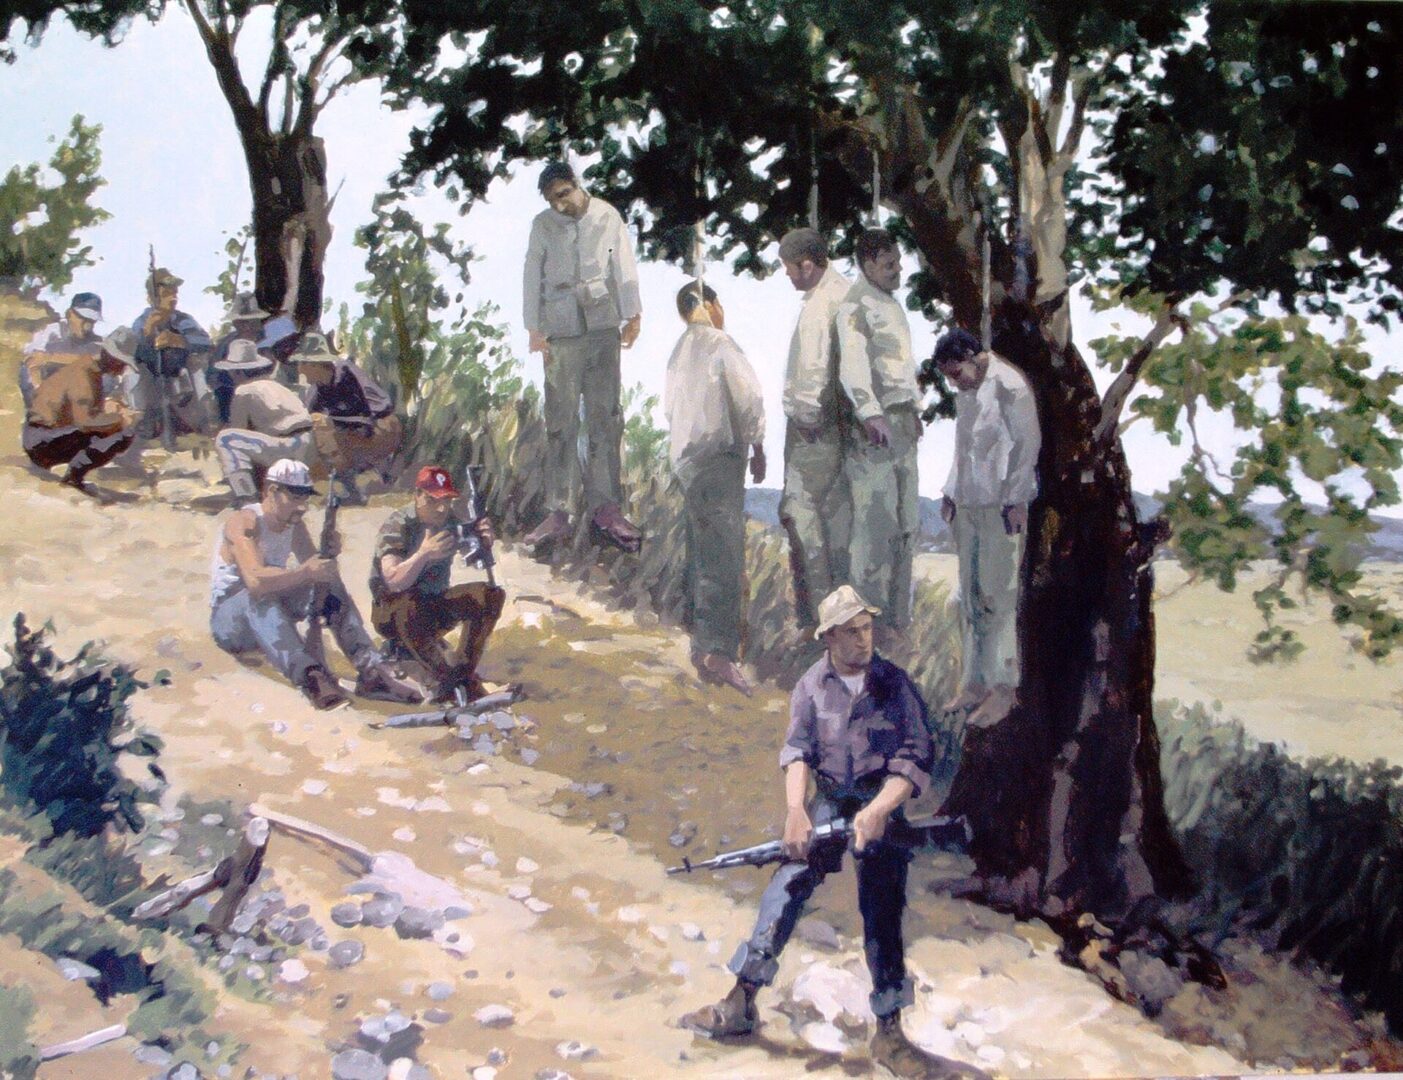 THE COUNSELORS FRUIT TREES<br>
1991<br>
30" x 40"
